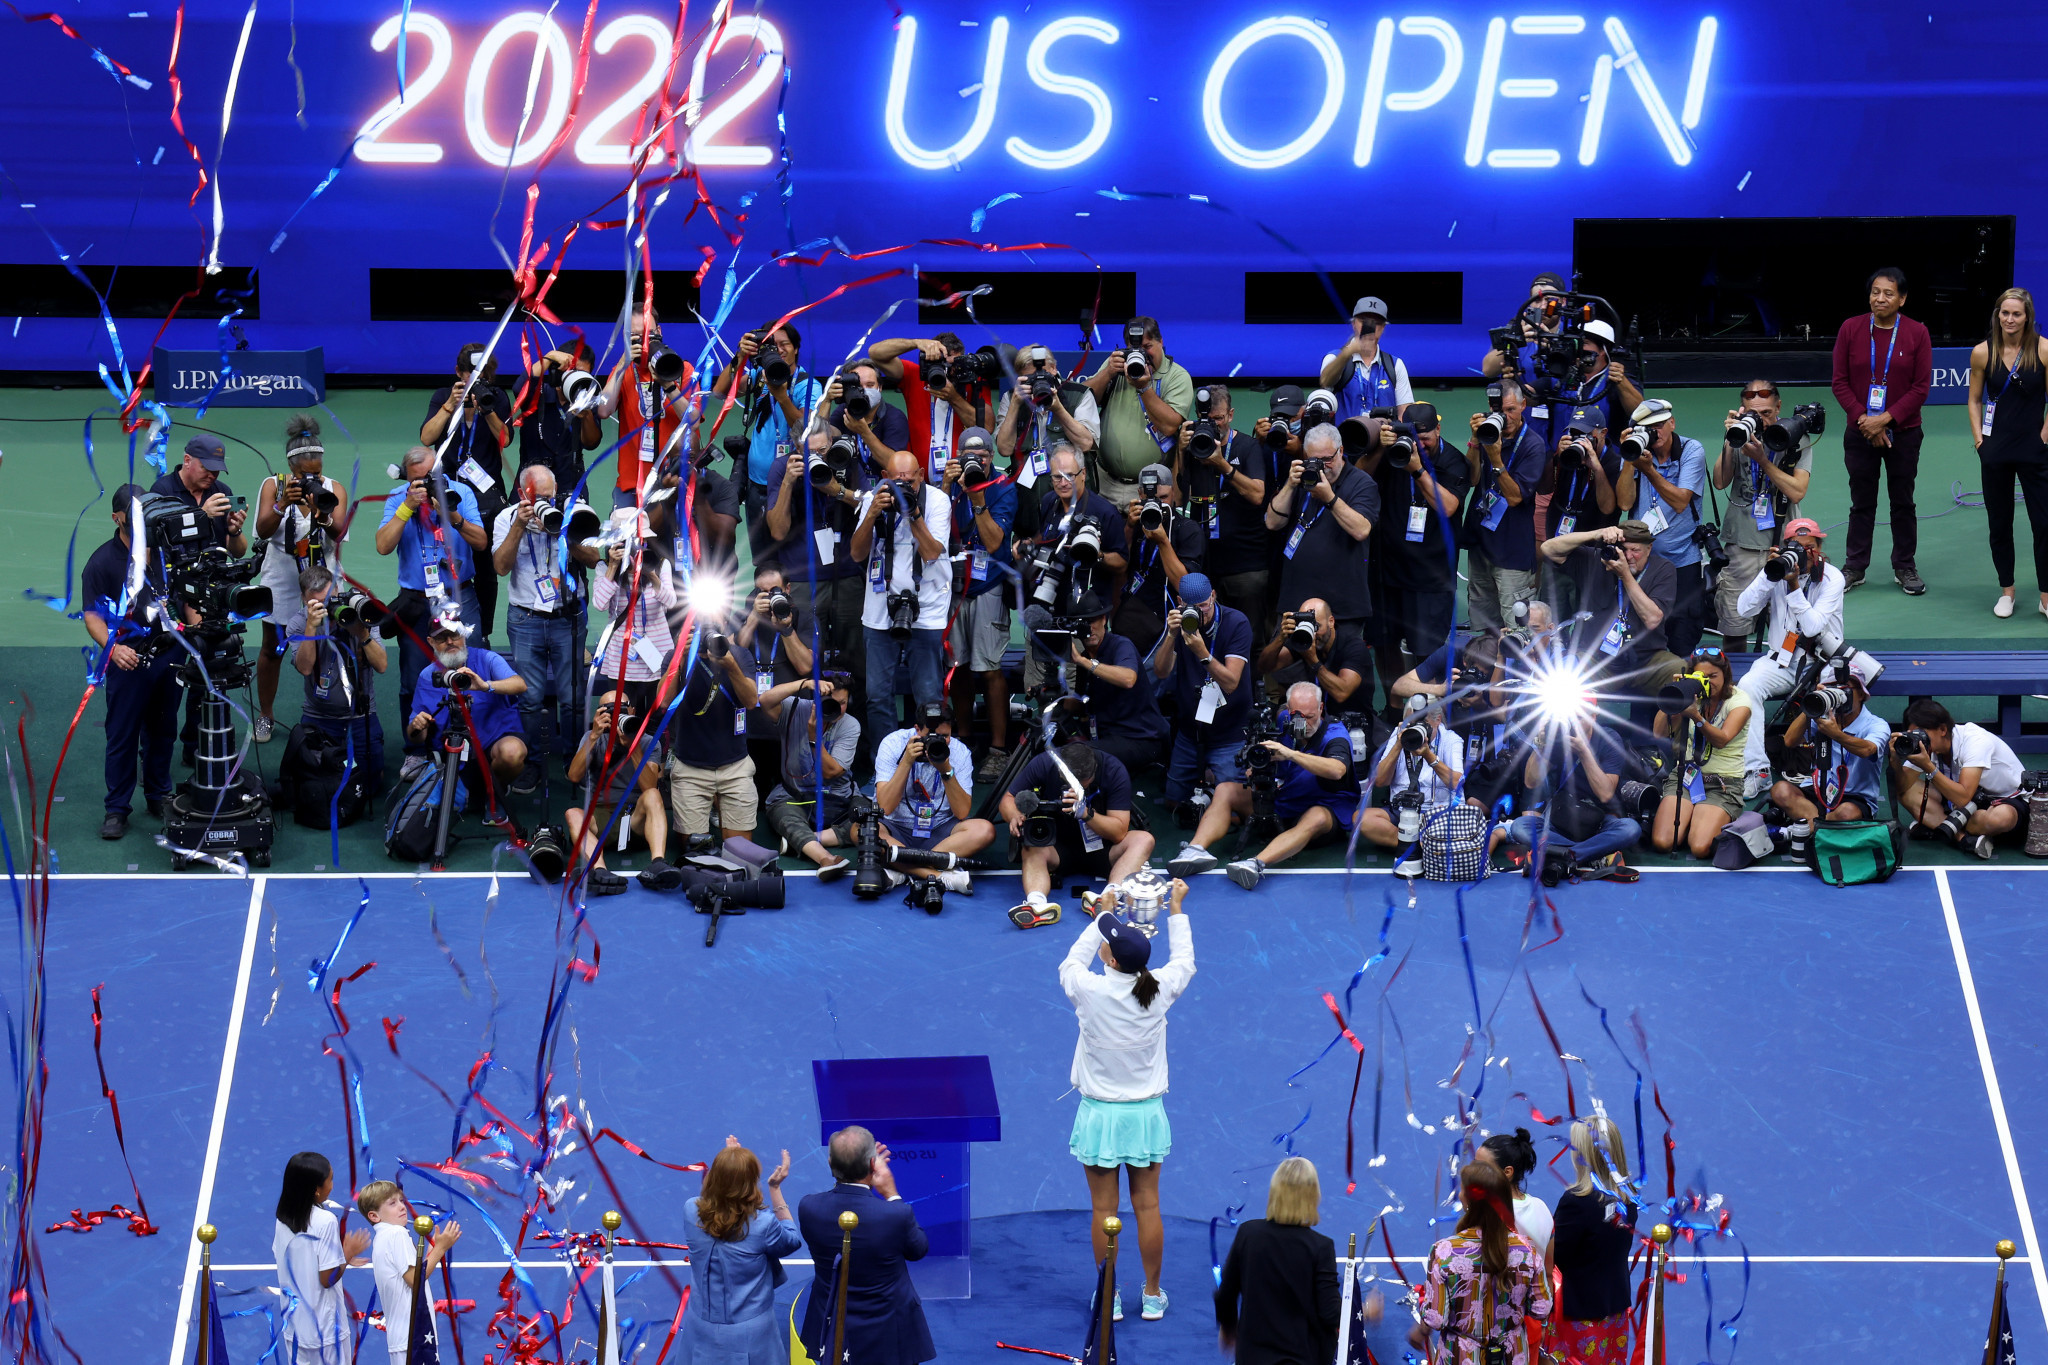 The victory marked Świątek's first triumph at the US Open ©Getty Images